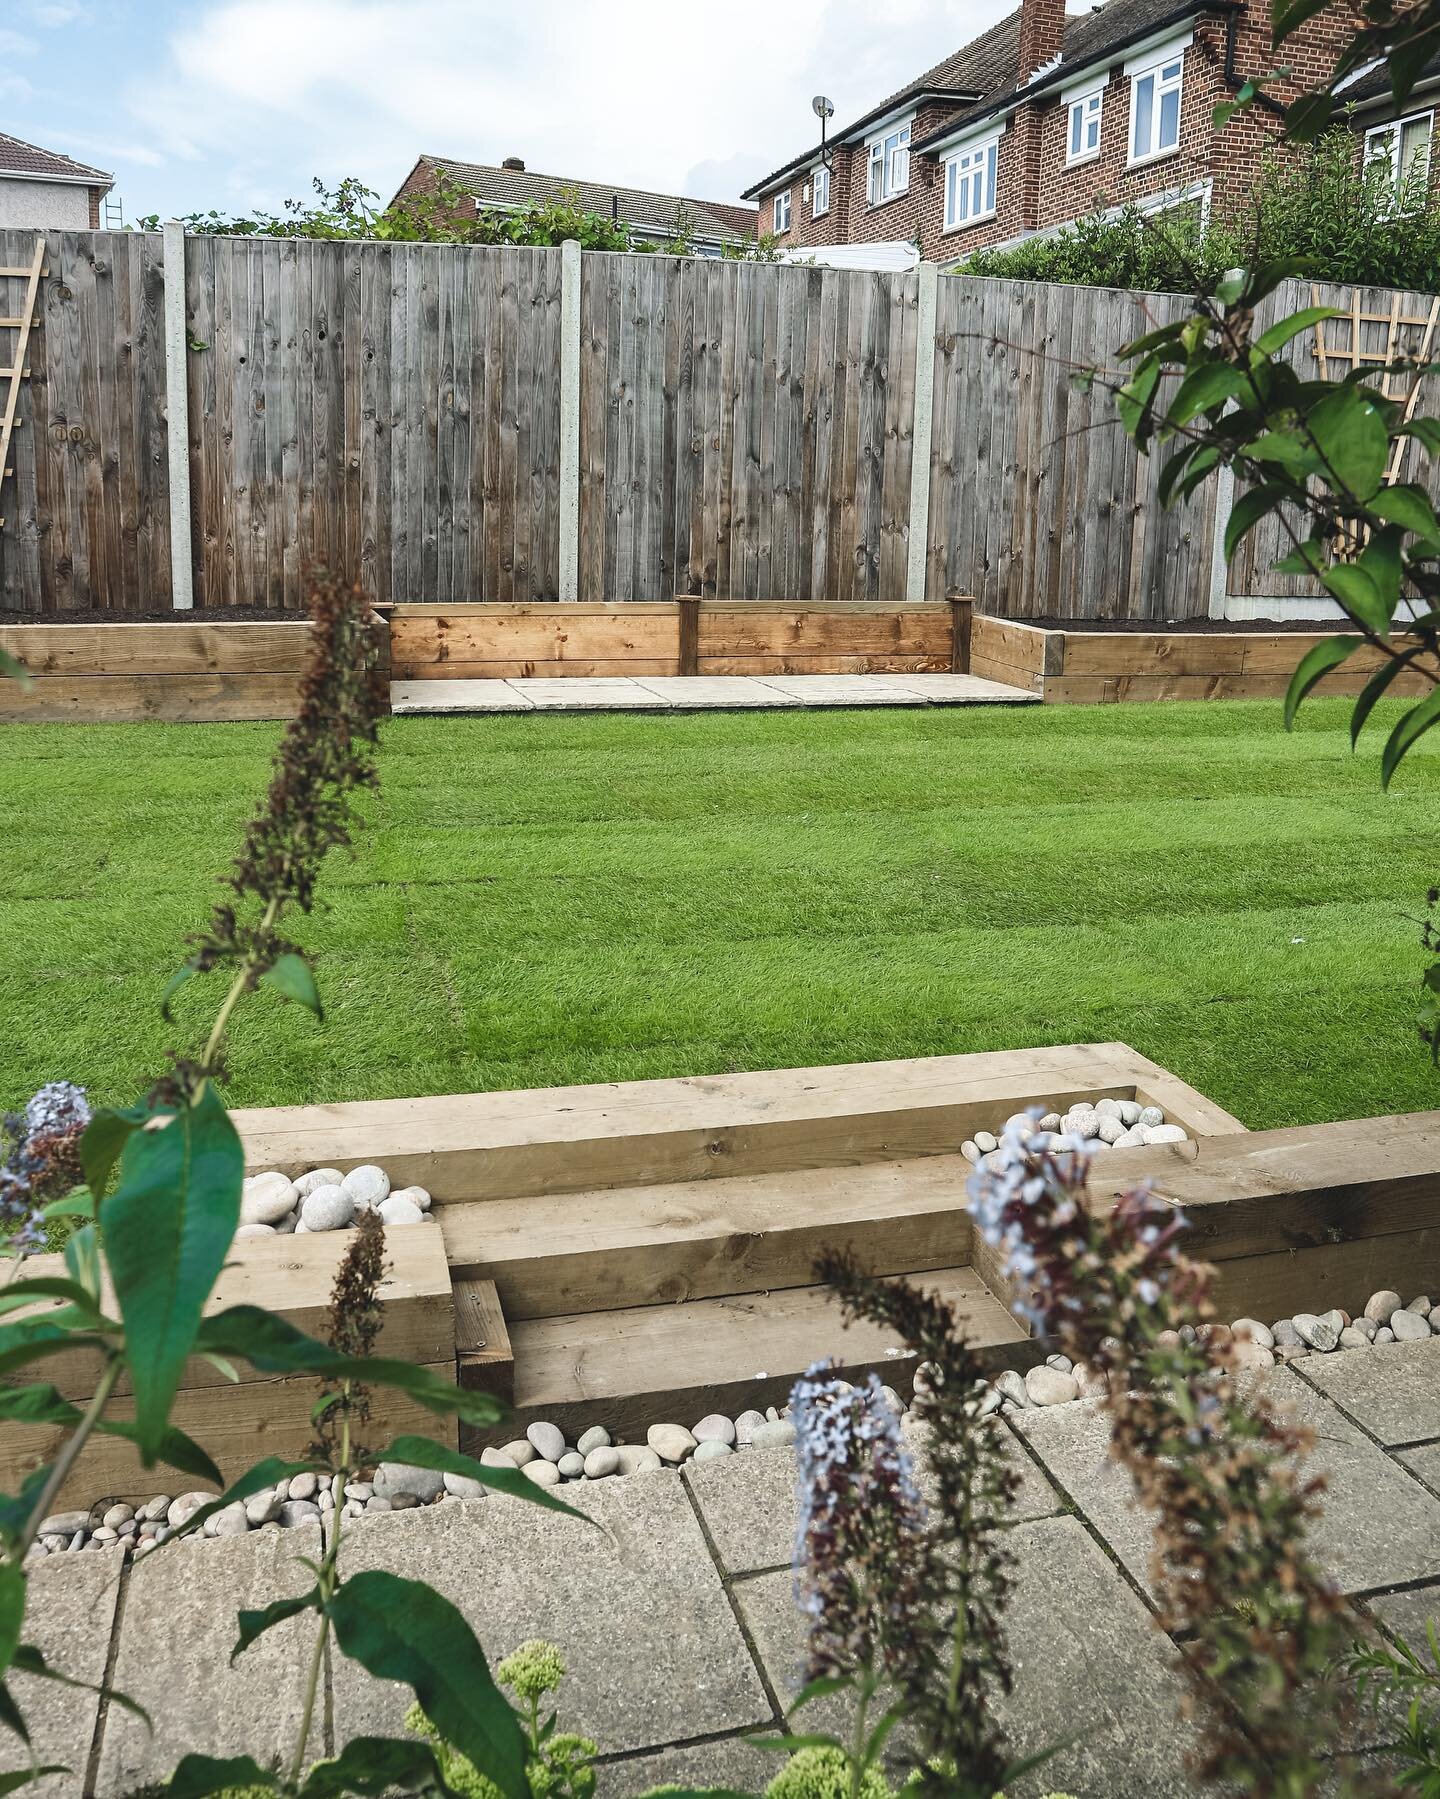 We completely redesigned this garden over Summer. We installed a new fence, lawn, 2 large sleeper beds with a wall running round the whole garden, a new shed was installed over an area of decorative stone as well as a small paved area that will have 